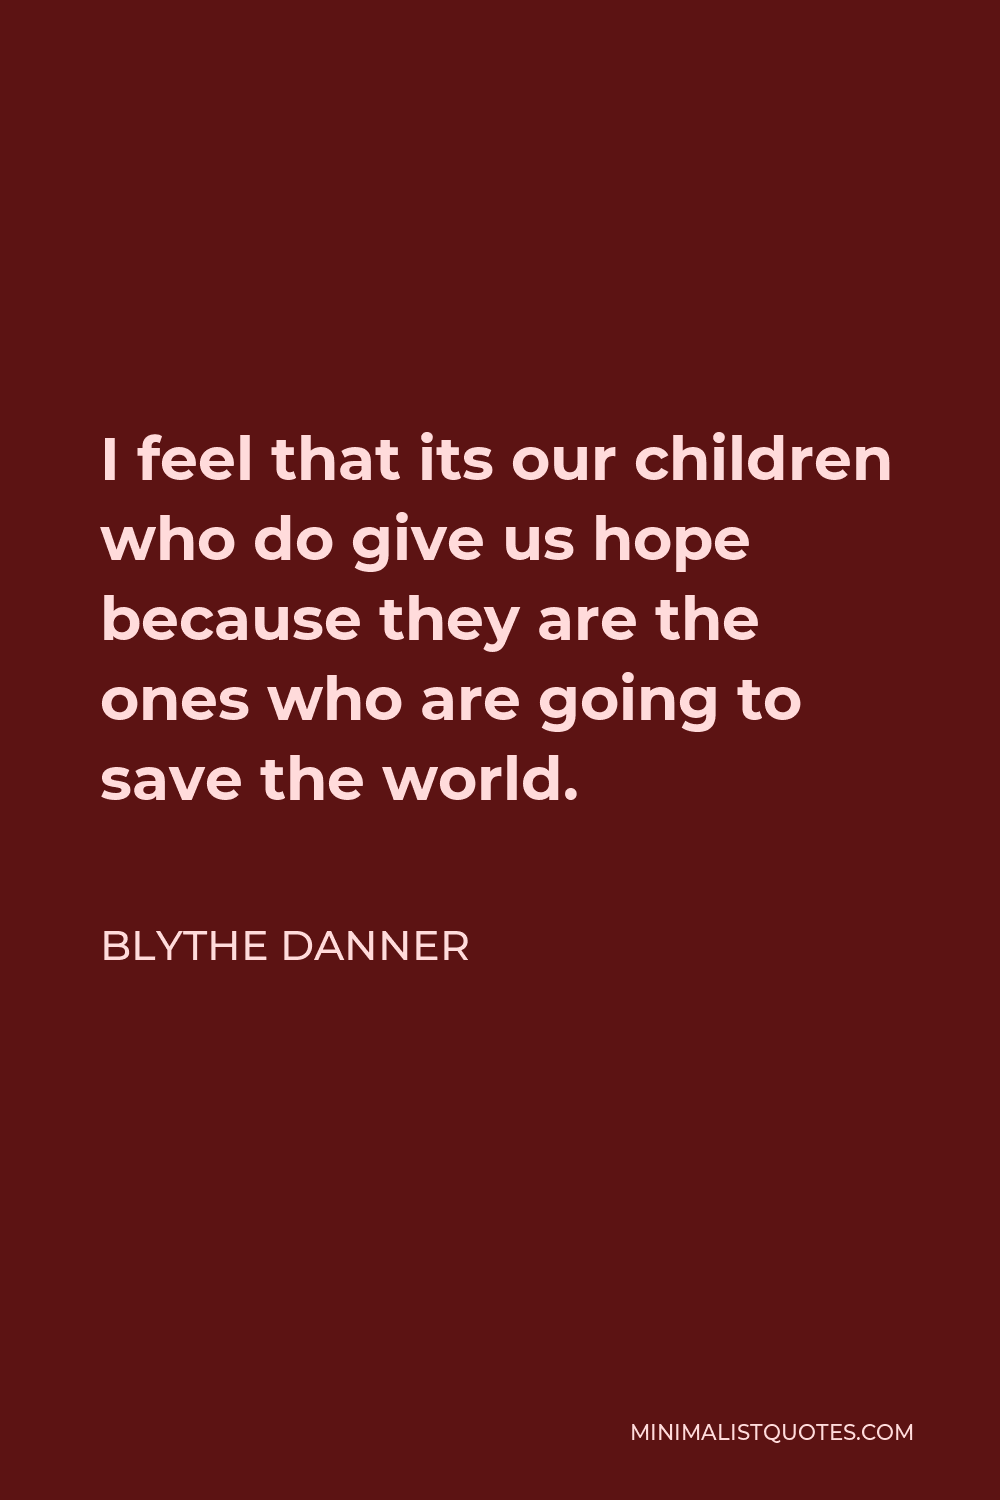 Blythe Danner Quote - I feel that its our children who do give us hope because they are the ones who are going to save the world.